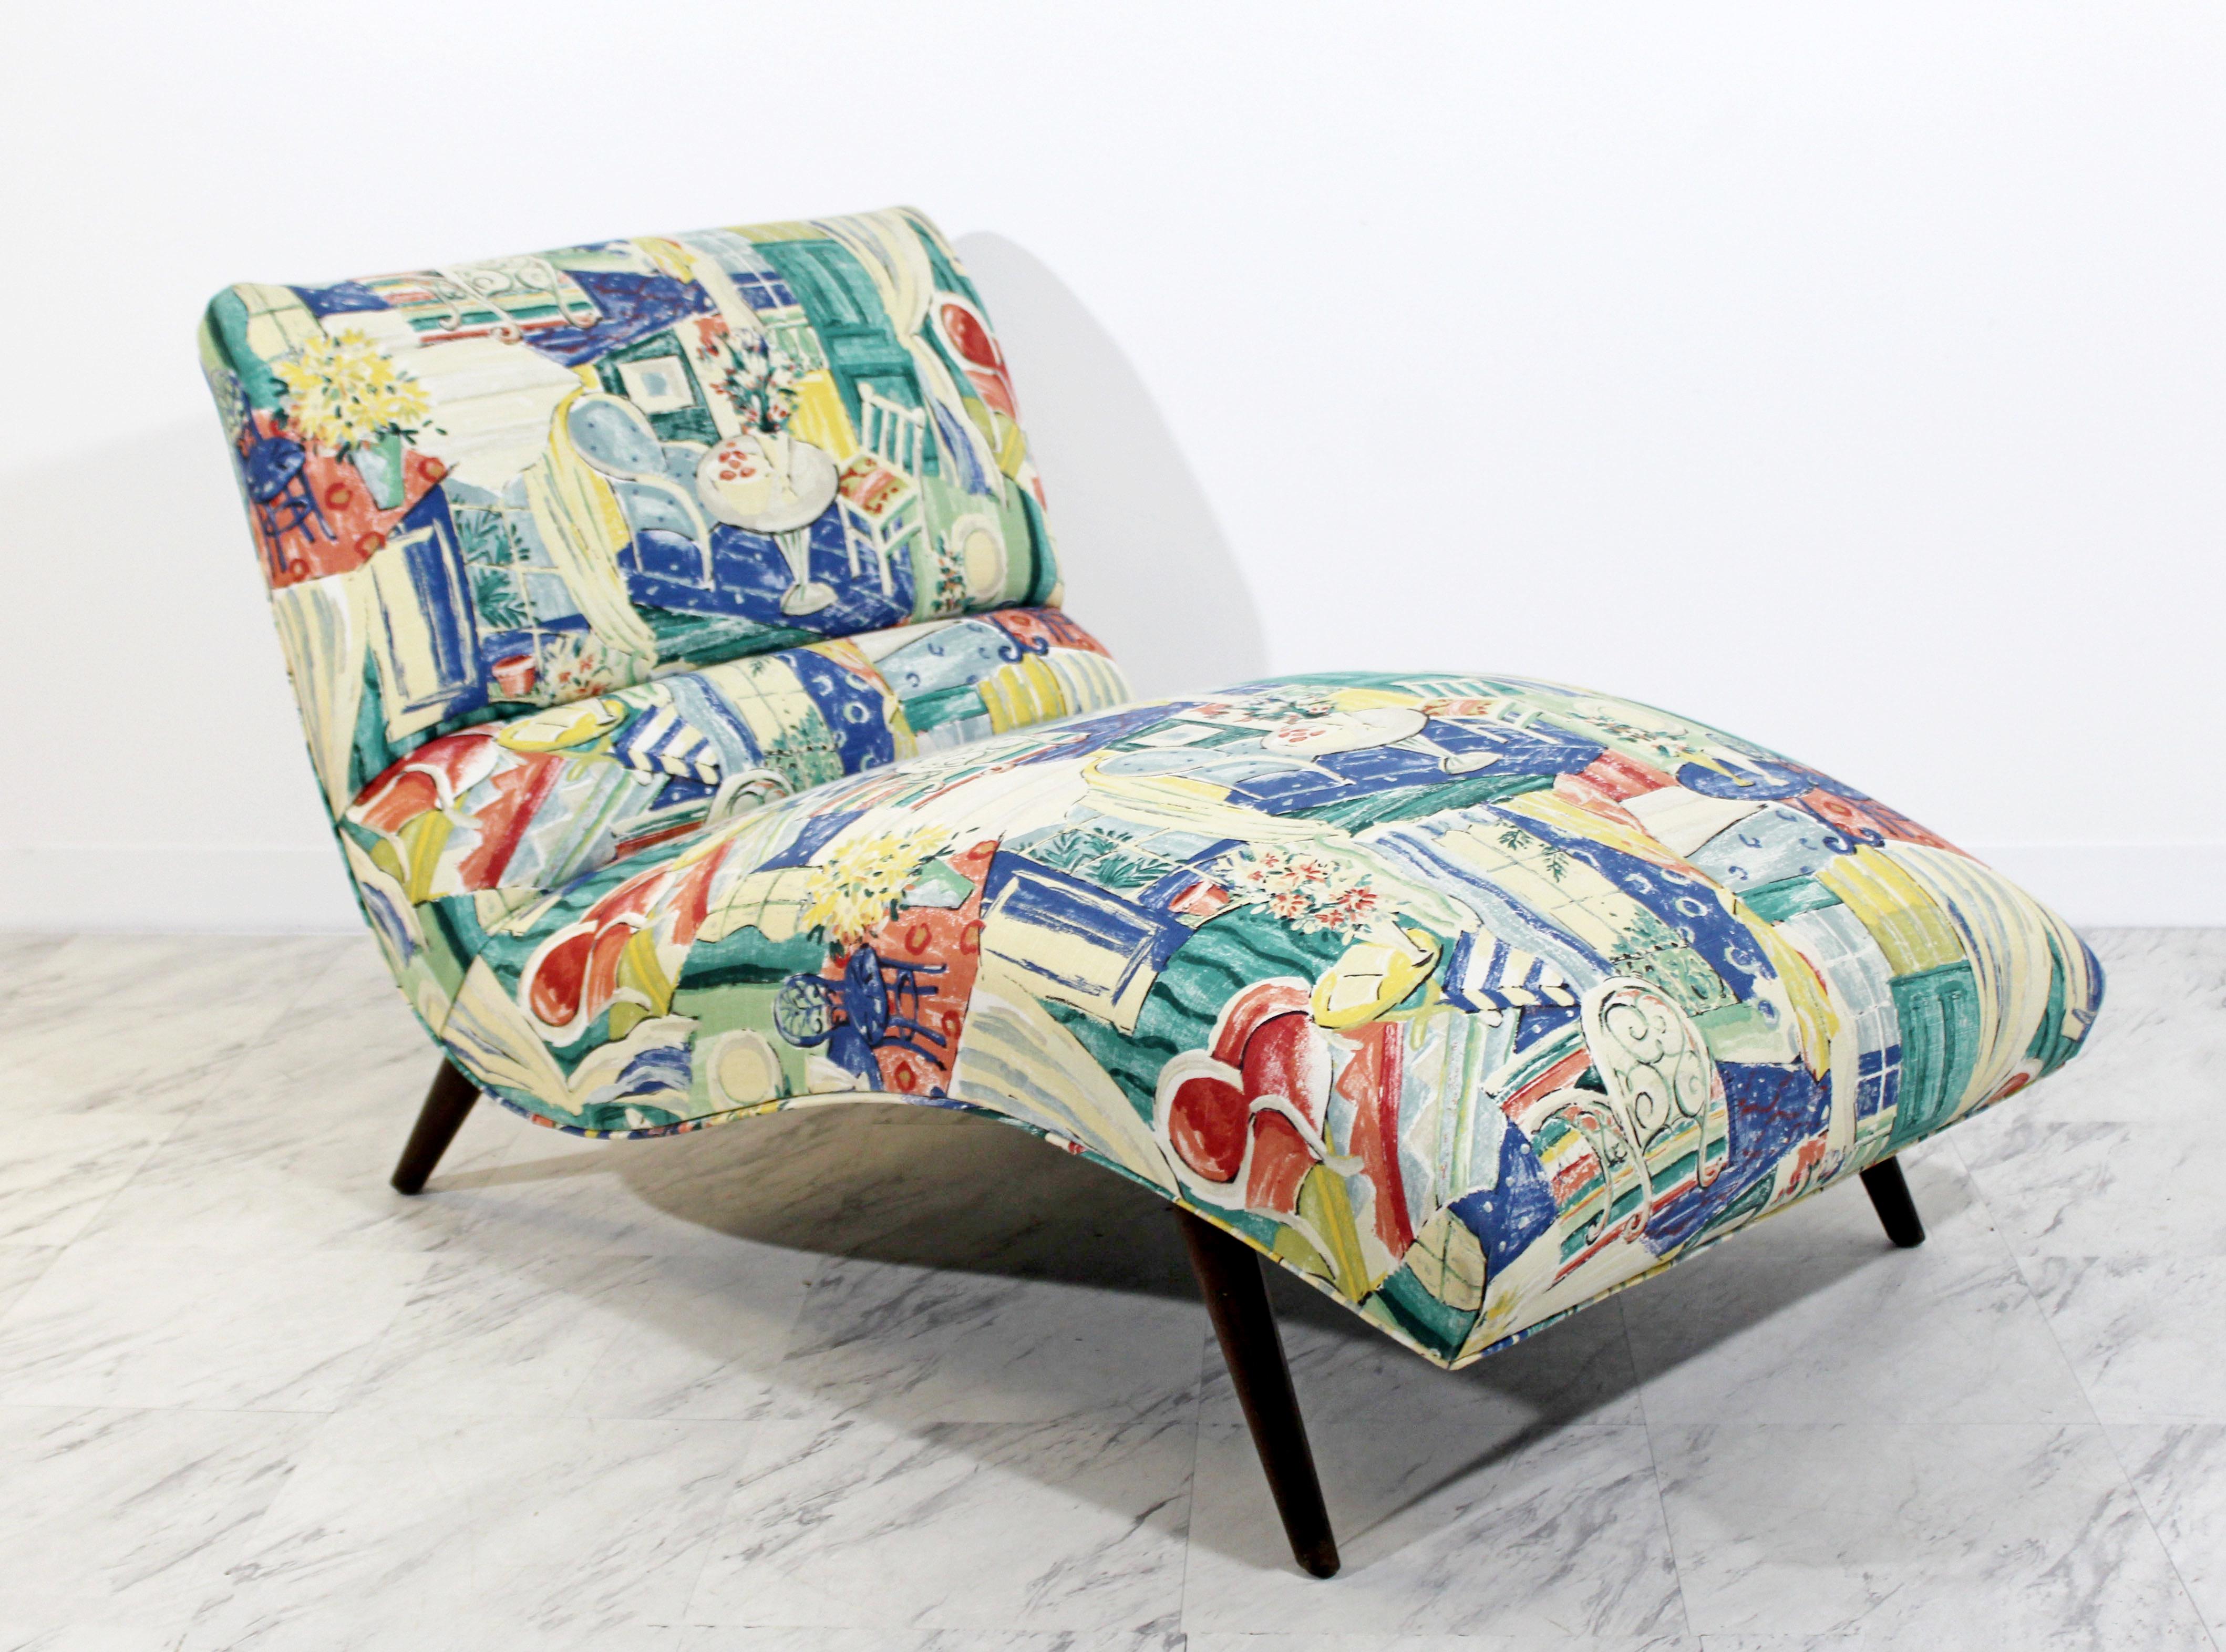 For your consideration is a fantastic, contoured wave, chaise lounge chair, with a scenic upholstery, by Adrian Pearsall, circa the 1950s. In excellent condition. The dimensions are 54